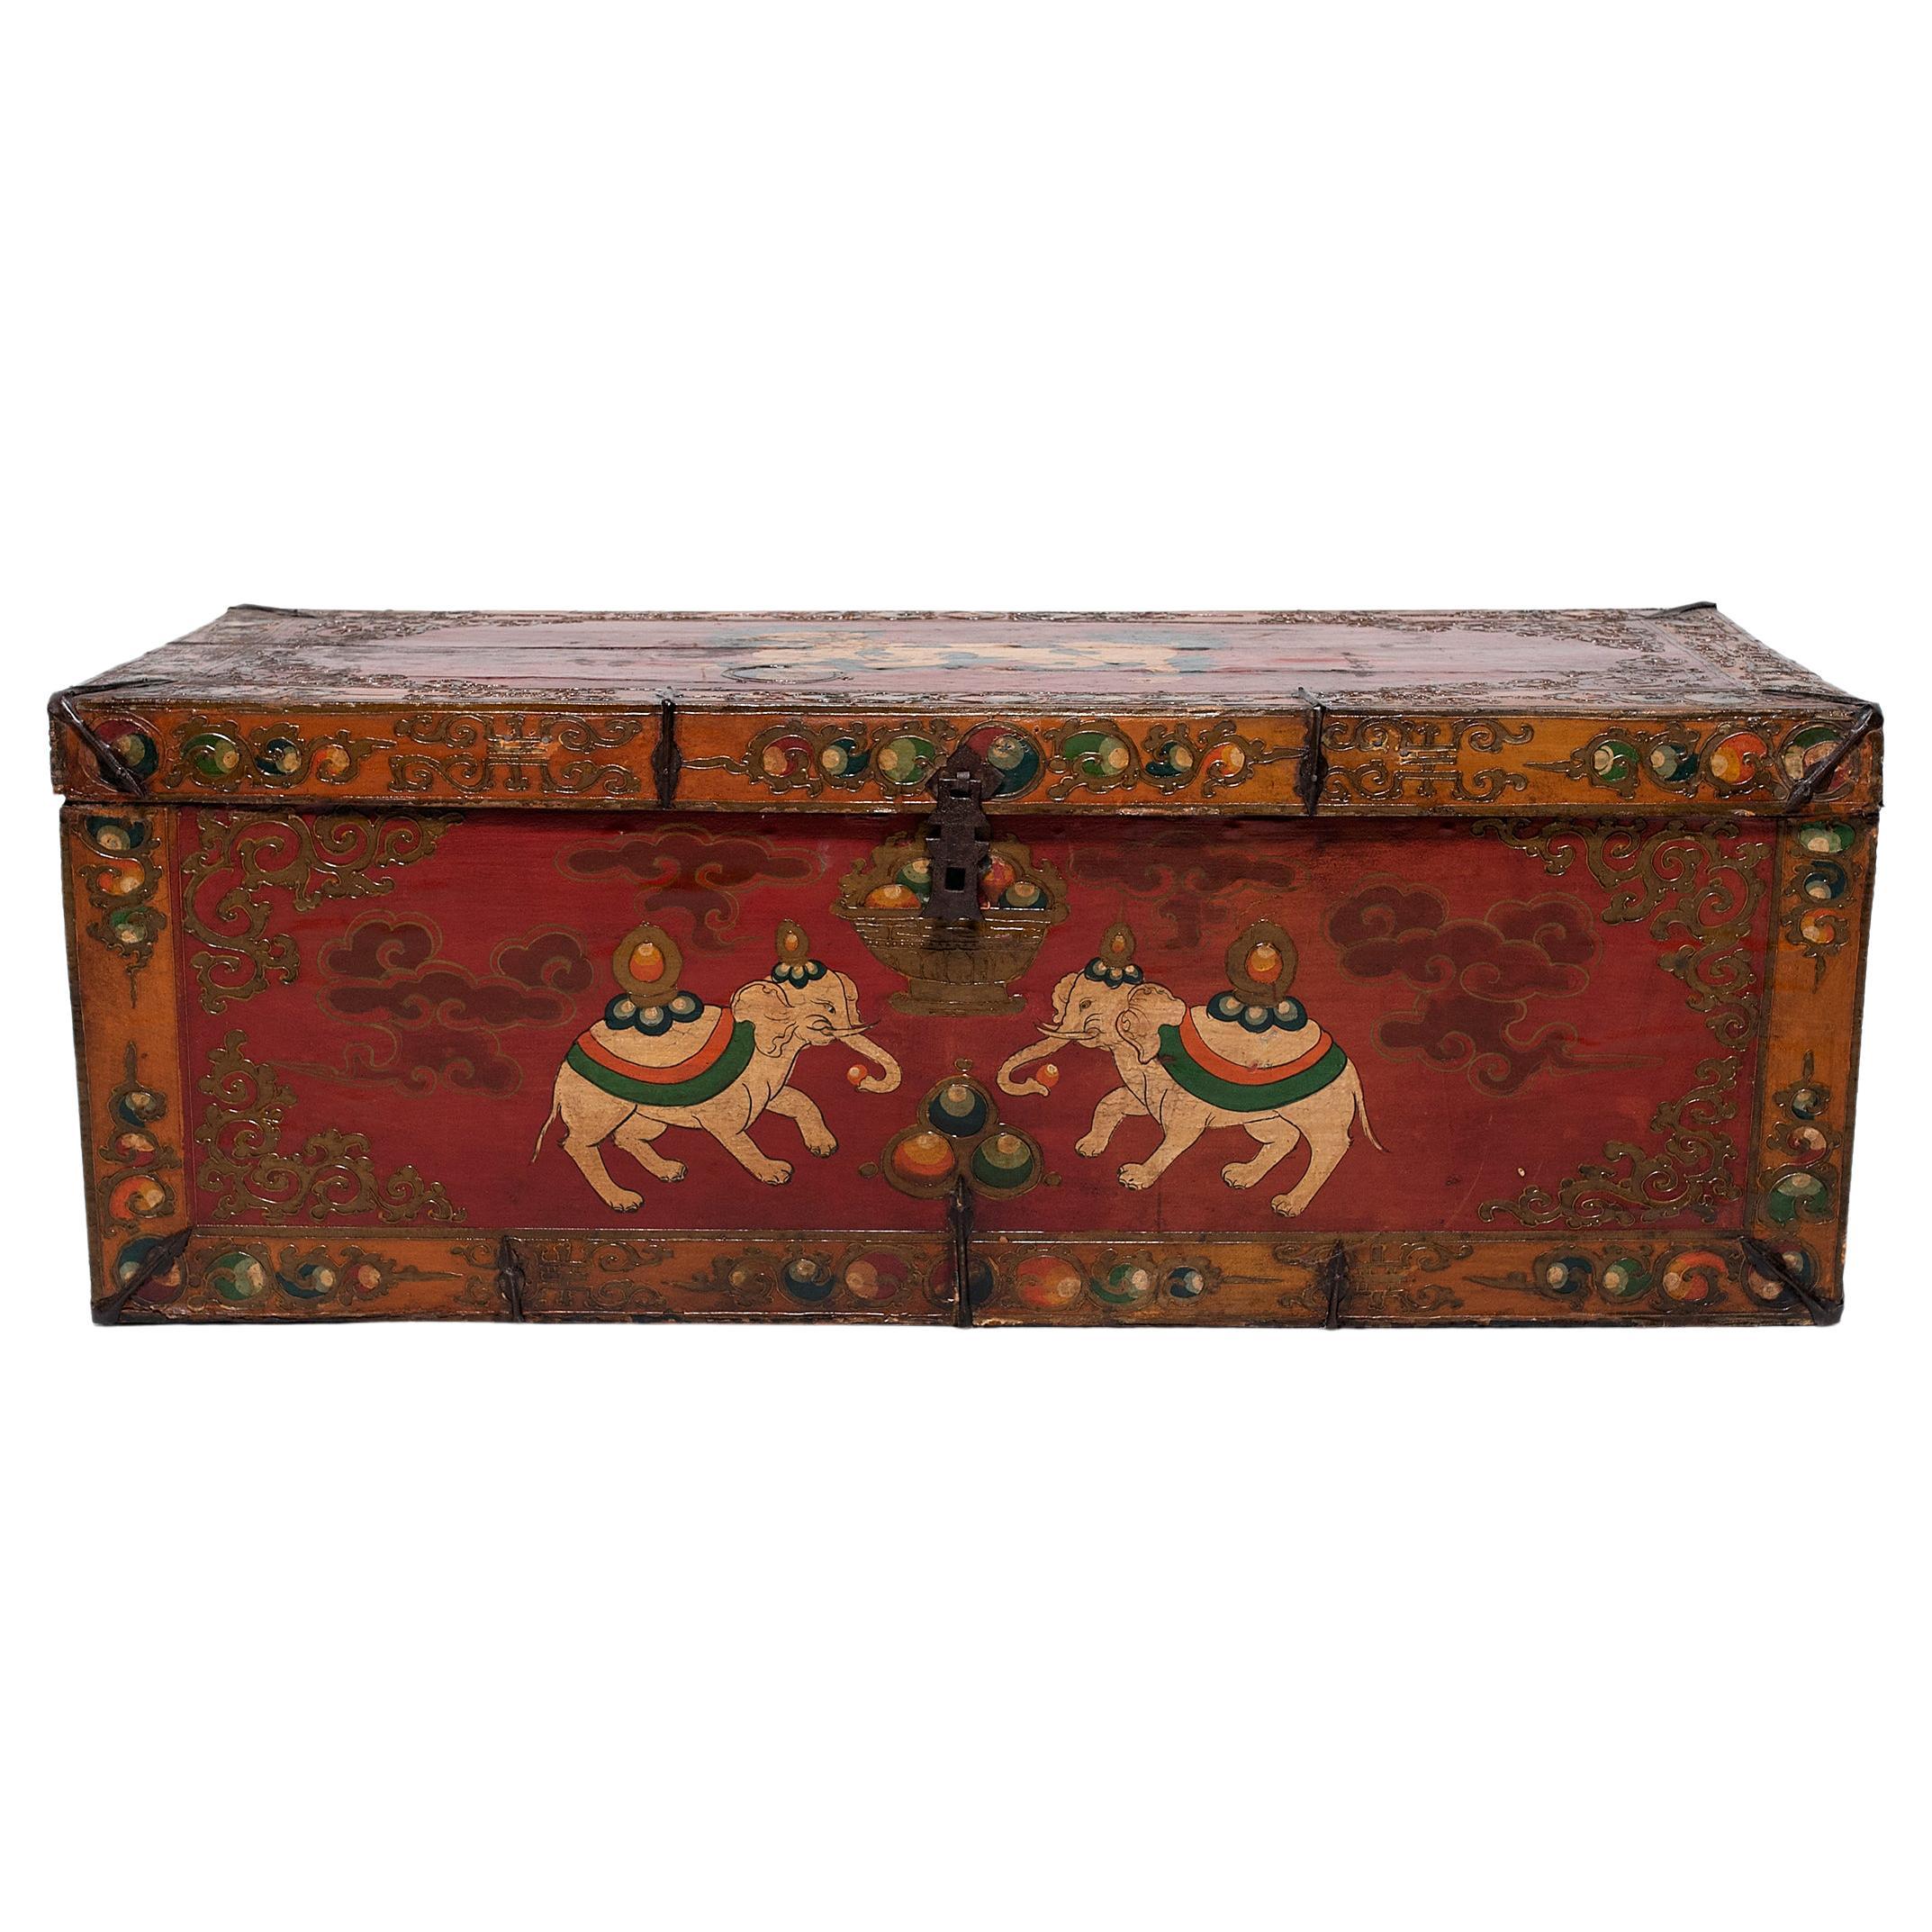 Northern Chinese Painted Elephant Trunk, c. 1900